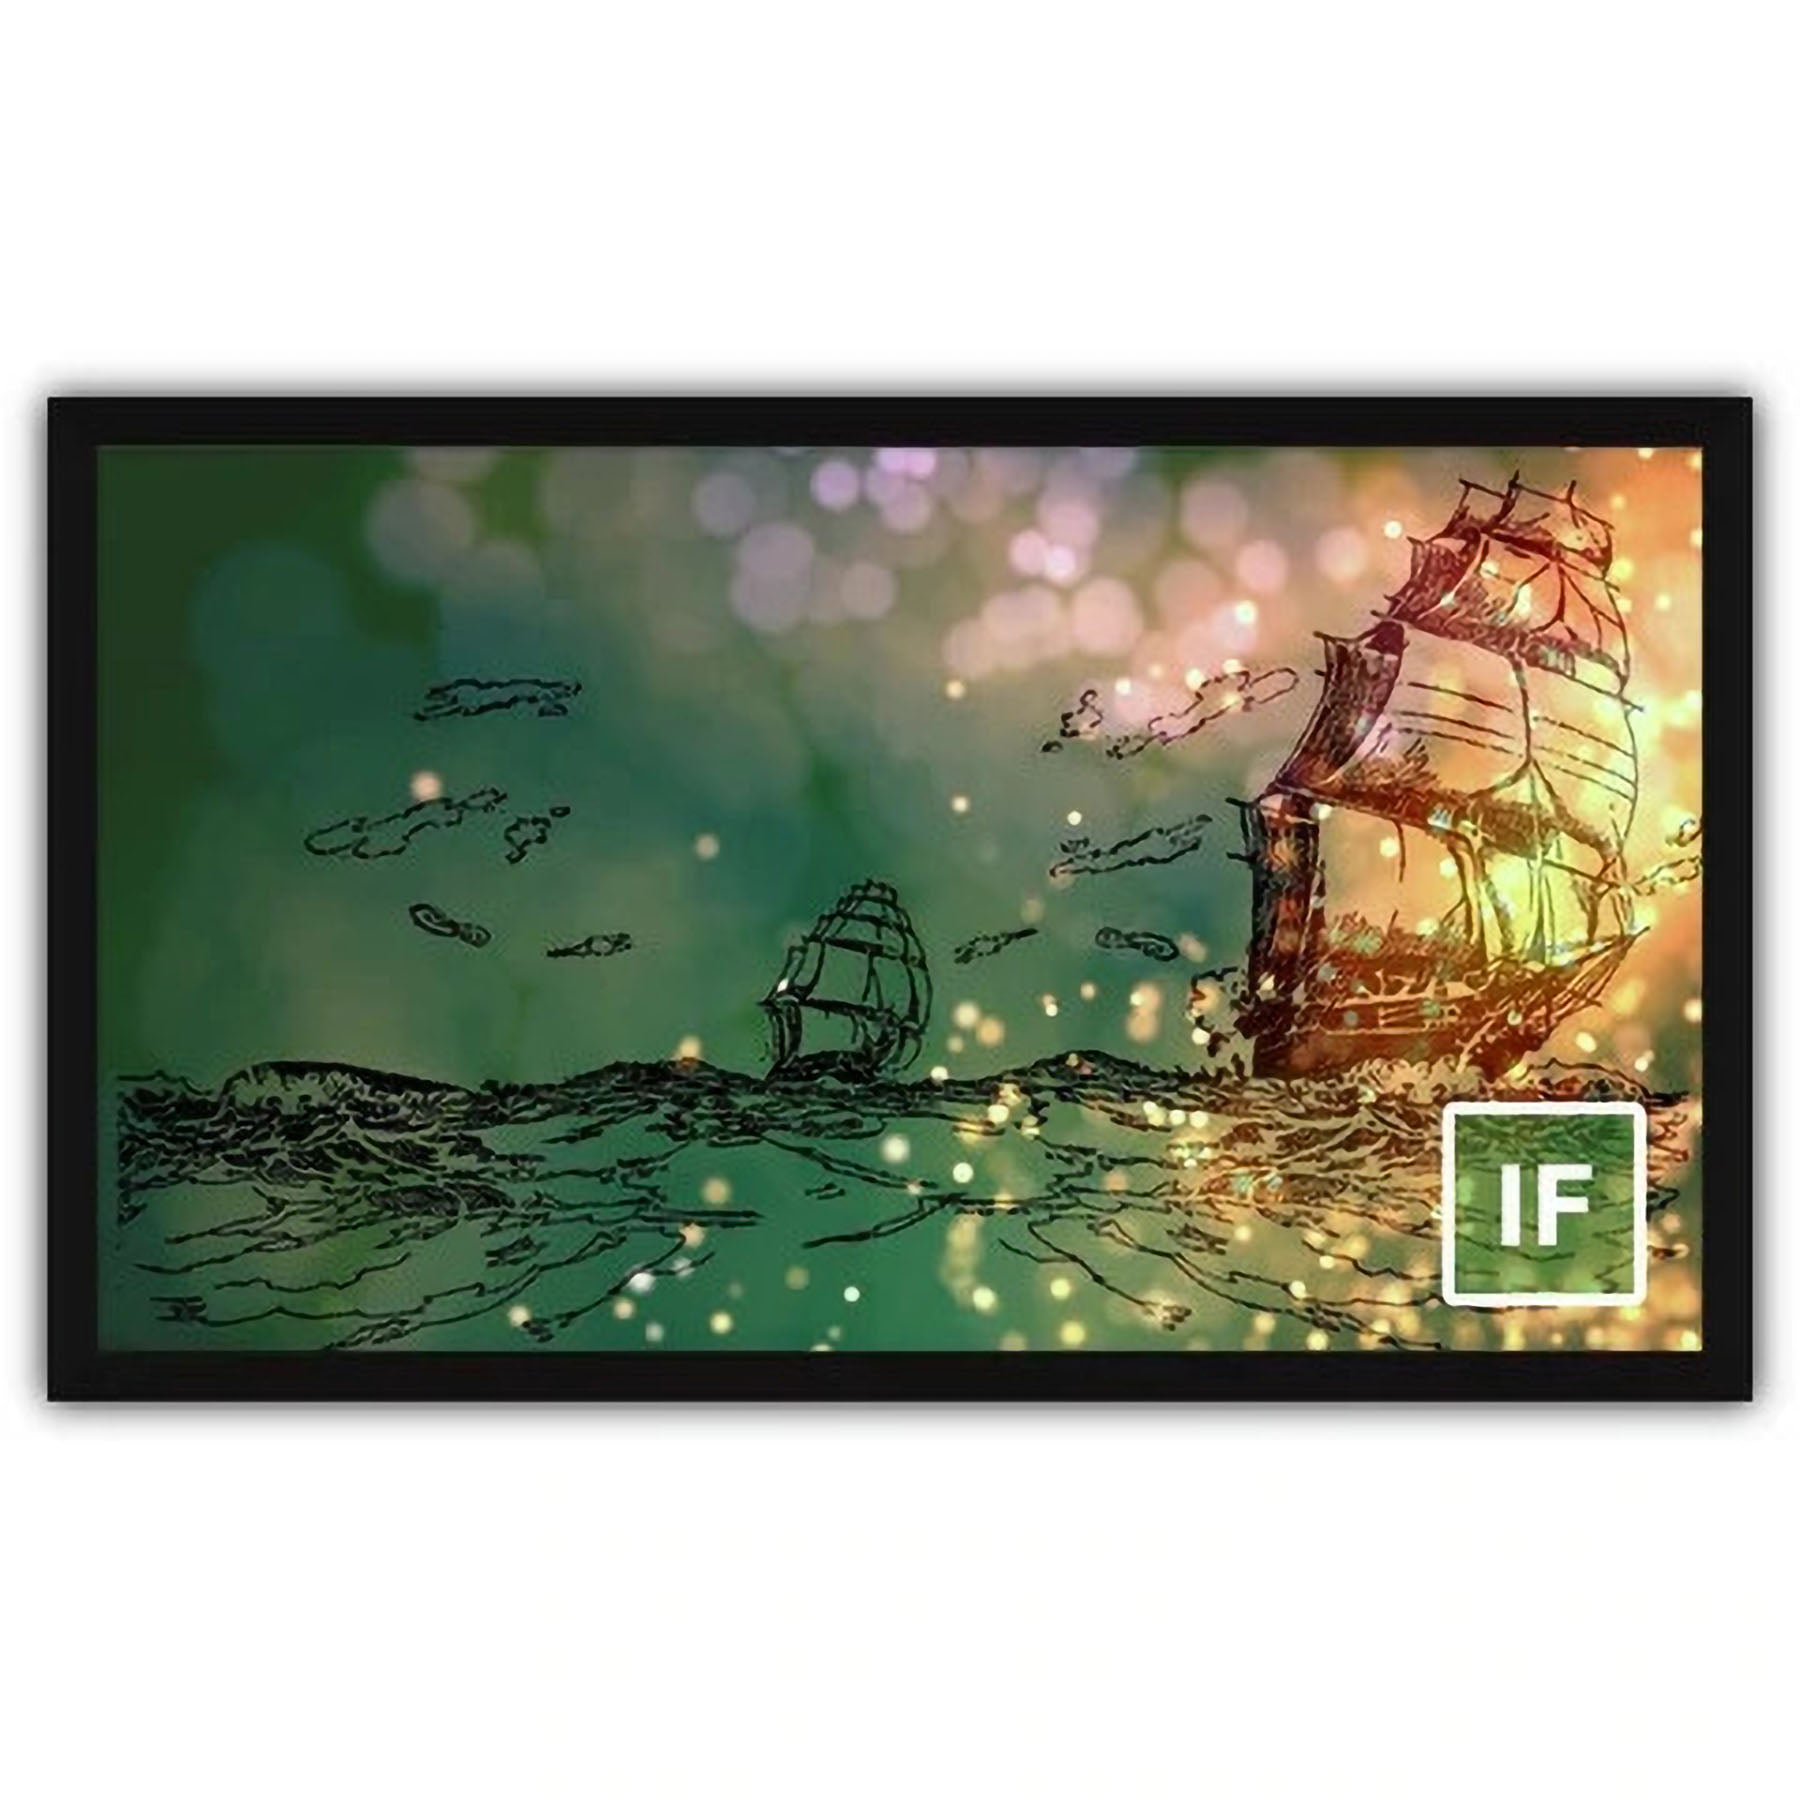 Severtson Screens Impression Series 16:9 120-inch Fixed Frame Projection Screen